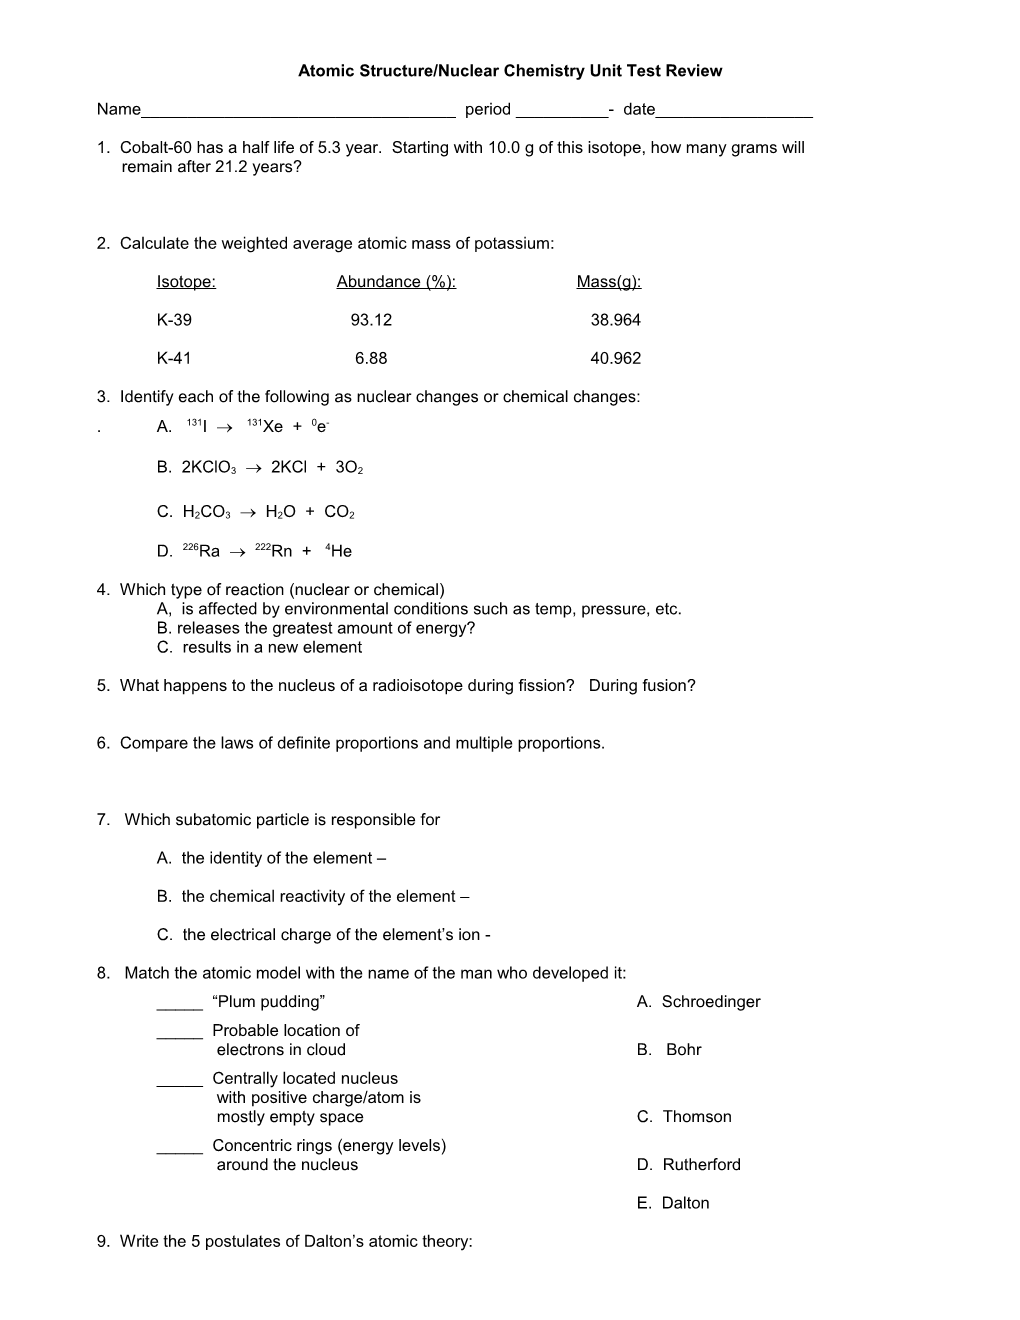 Atomic Structure/Nuclear Chemistry Unit Test Review